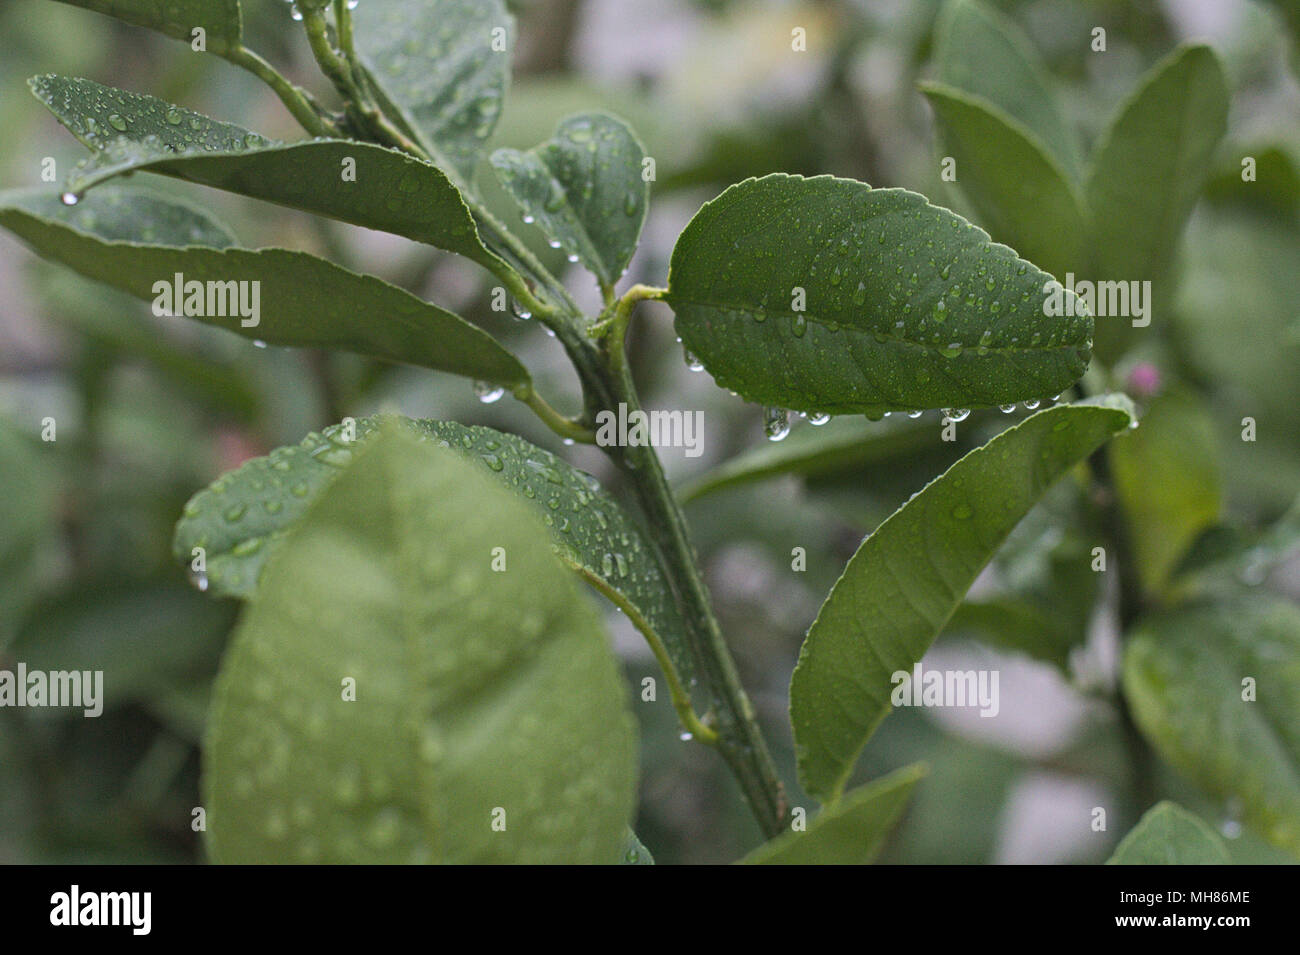 Leafy branch of a lemon citrus tree, with water droplets after a rainstorm. Stock Photo